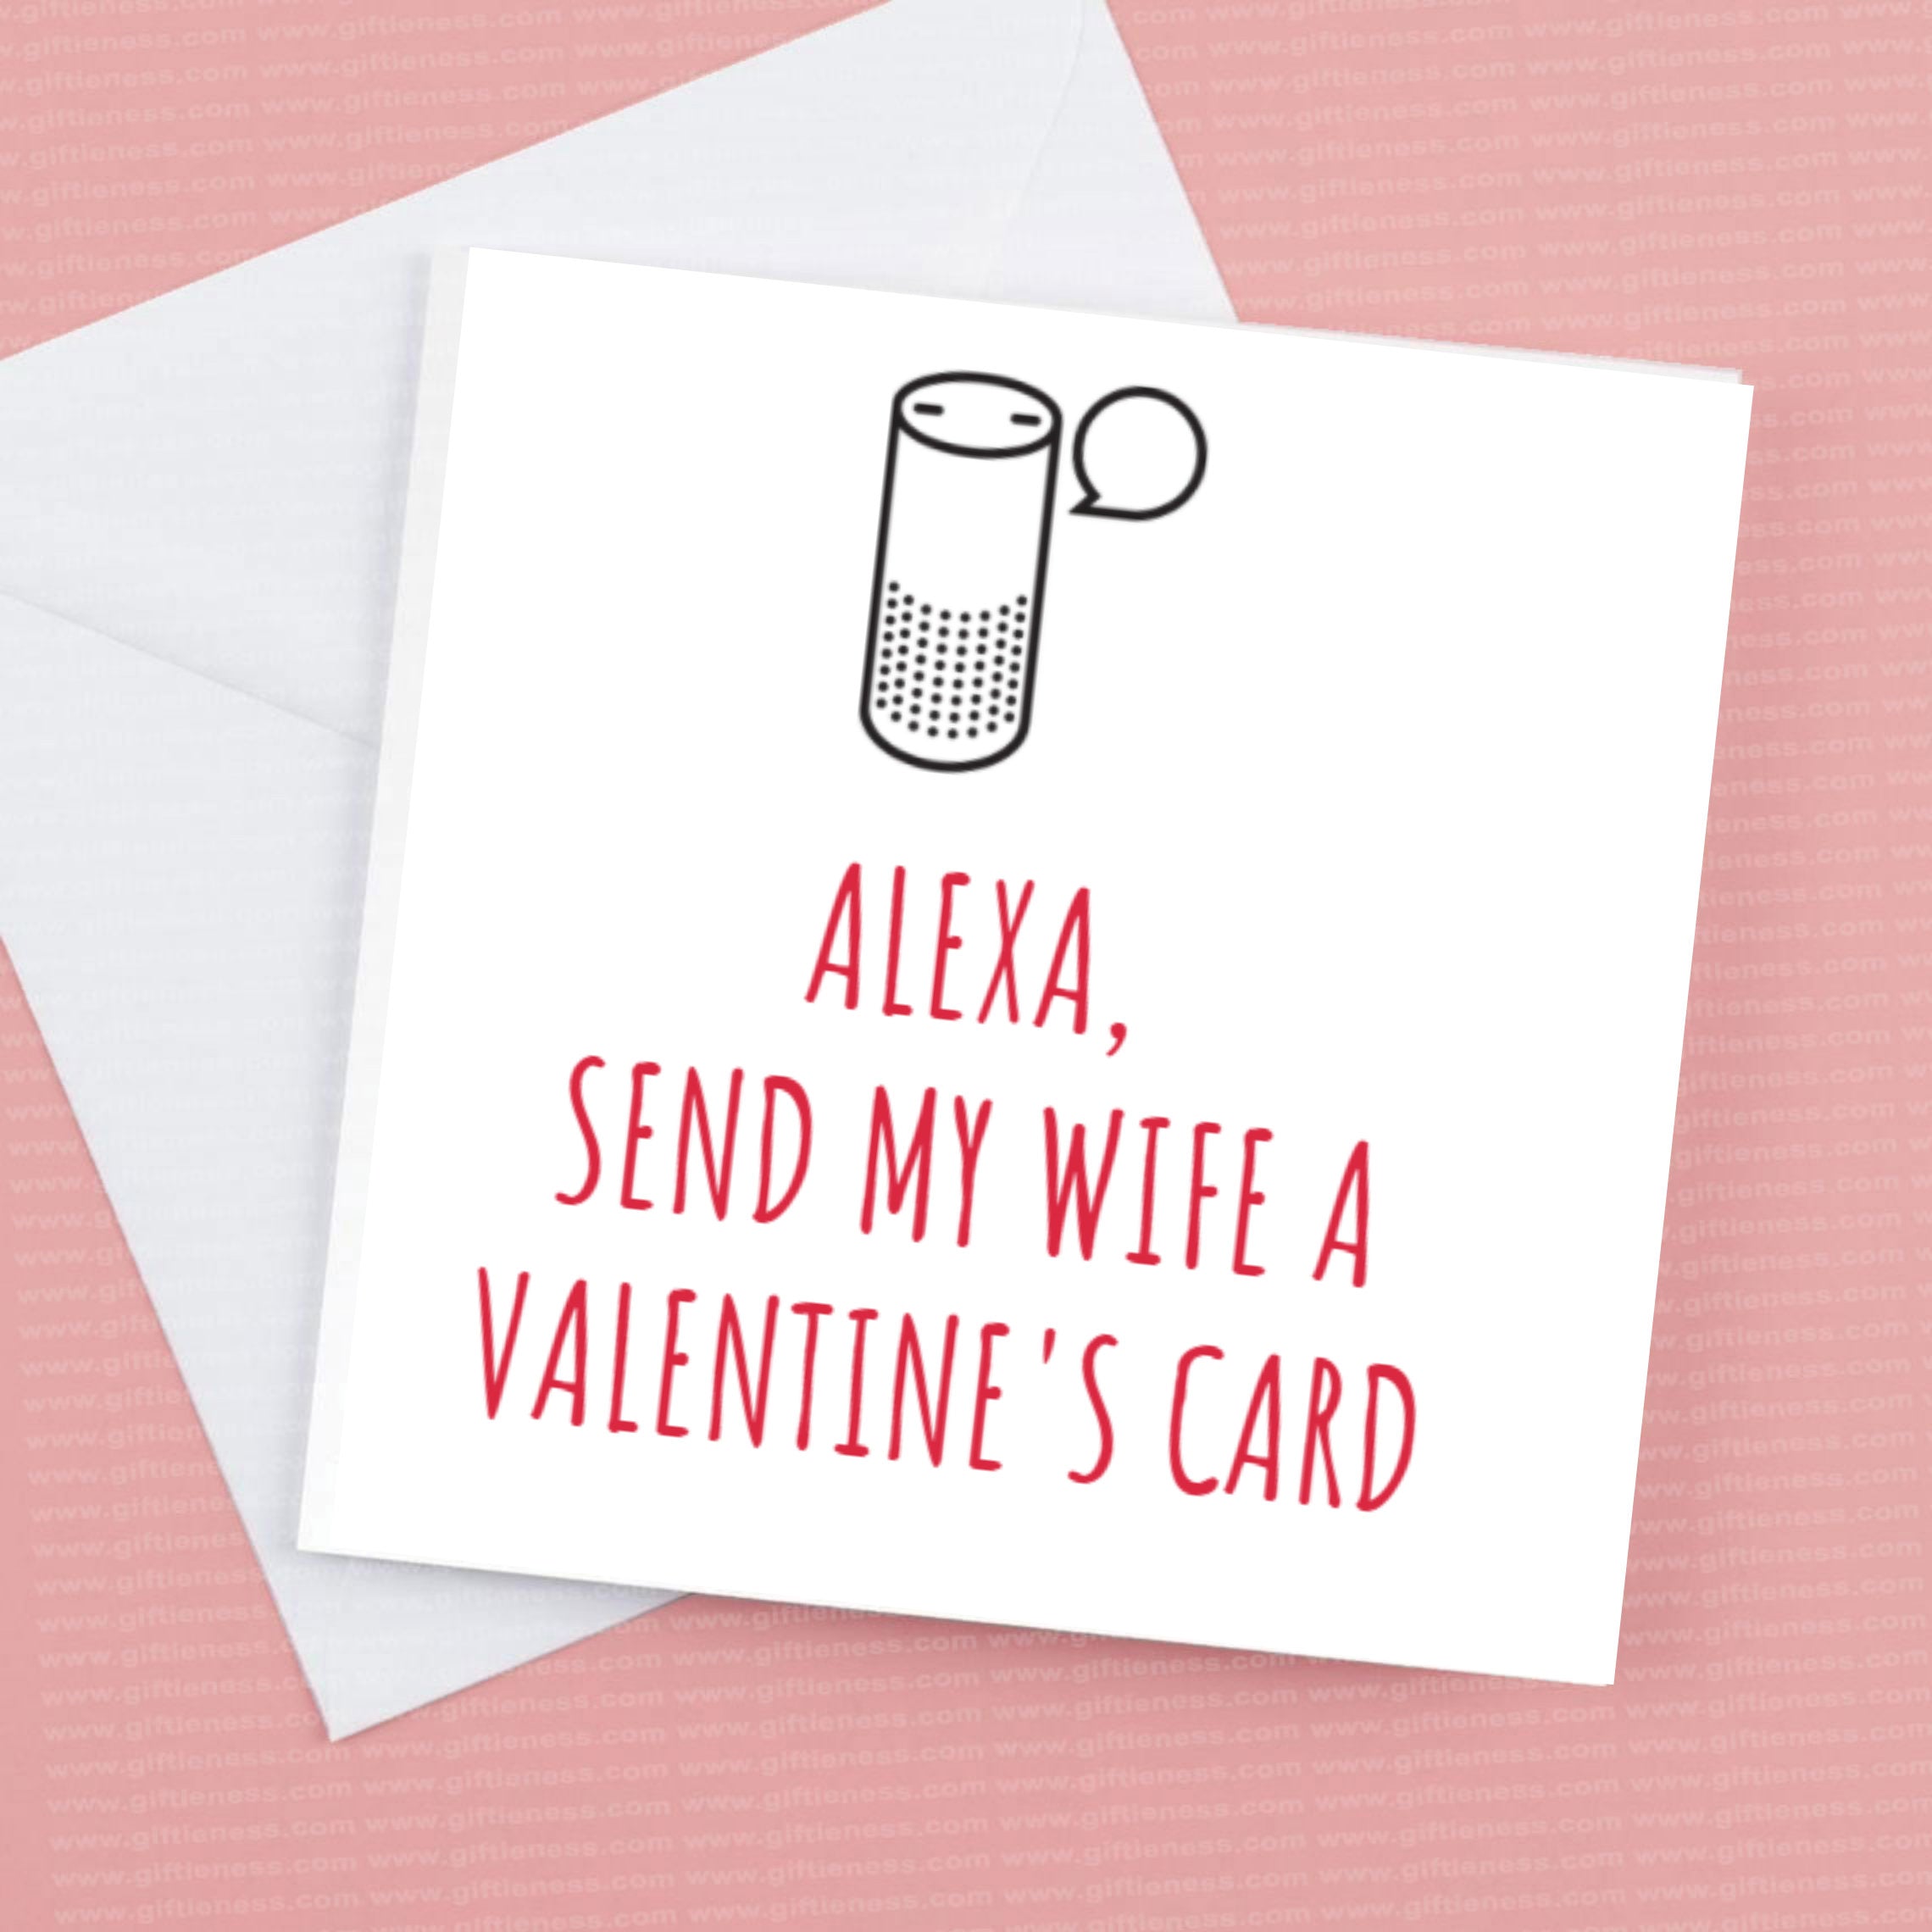 Valentines Card from Alexa, from Girlfriend, Wife, boyfriend or husband - options available